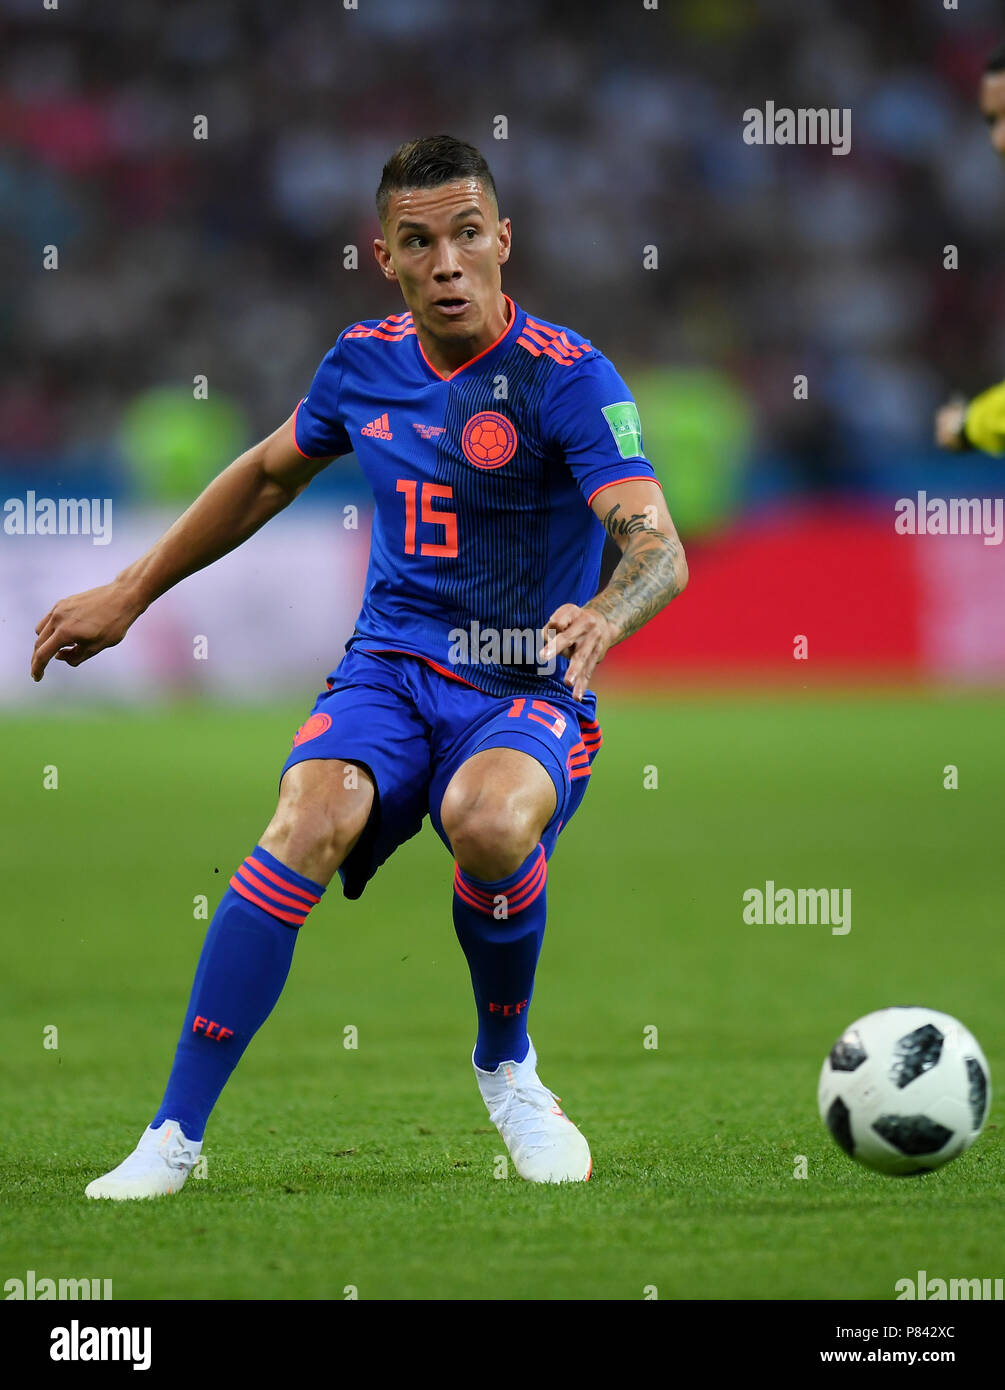 KAZAN, RUSSIA - JUNE 24: Mateus Uribe of Colombia in action during the 2018 FIFA World Cup Russia group H match between Poland and Colombia at Kazan Arena on June 24, 2018 in Kazan, Russia. (Photo by Lukasz Laskowski/PressFocus/MB Media) Stock Photo